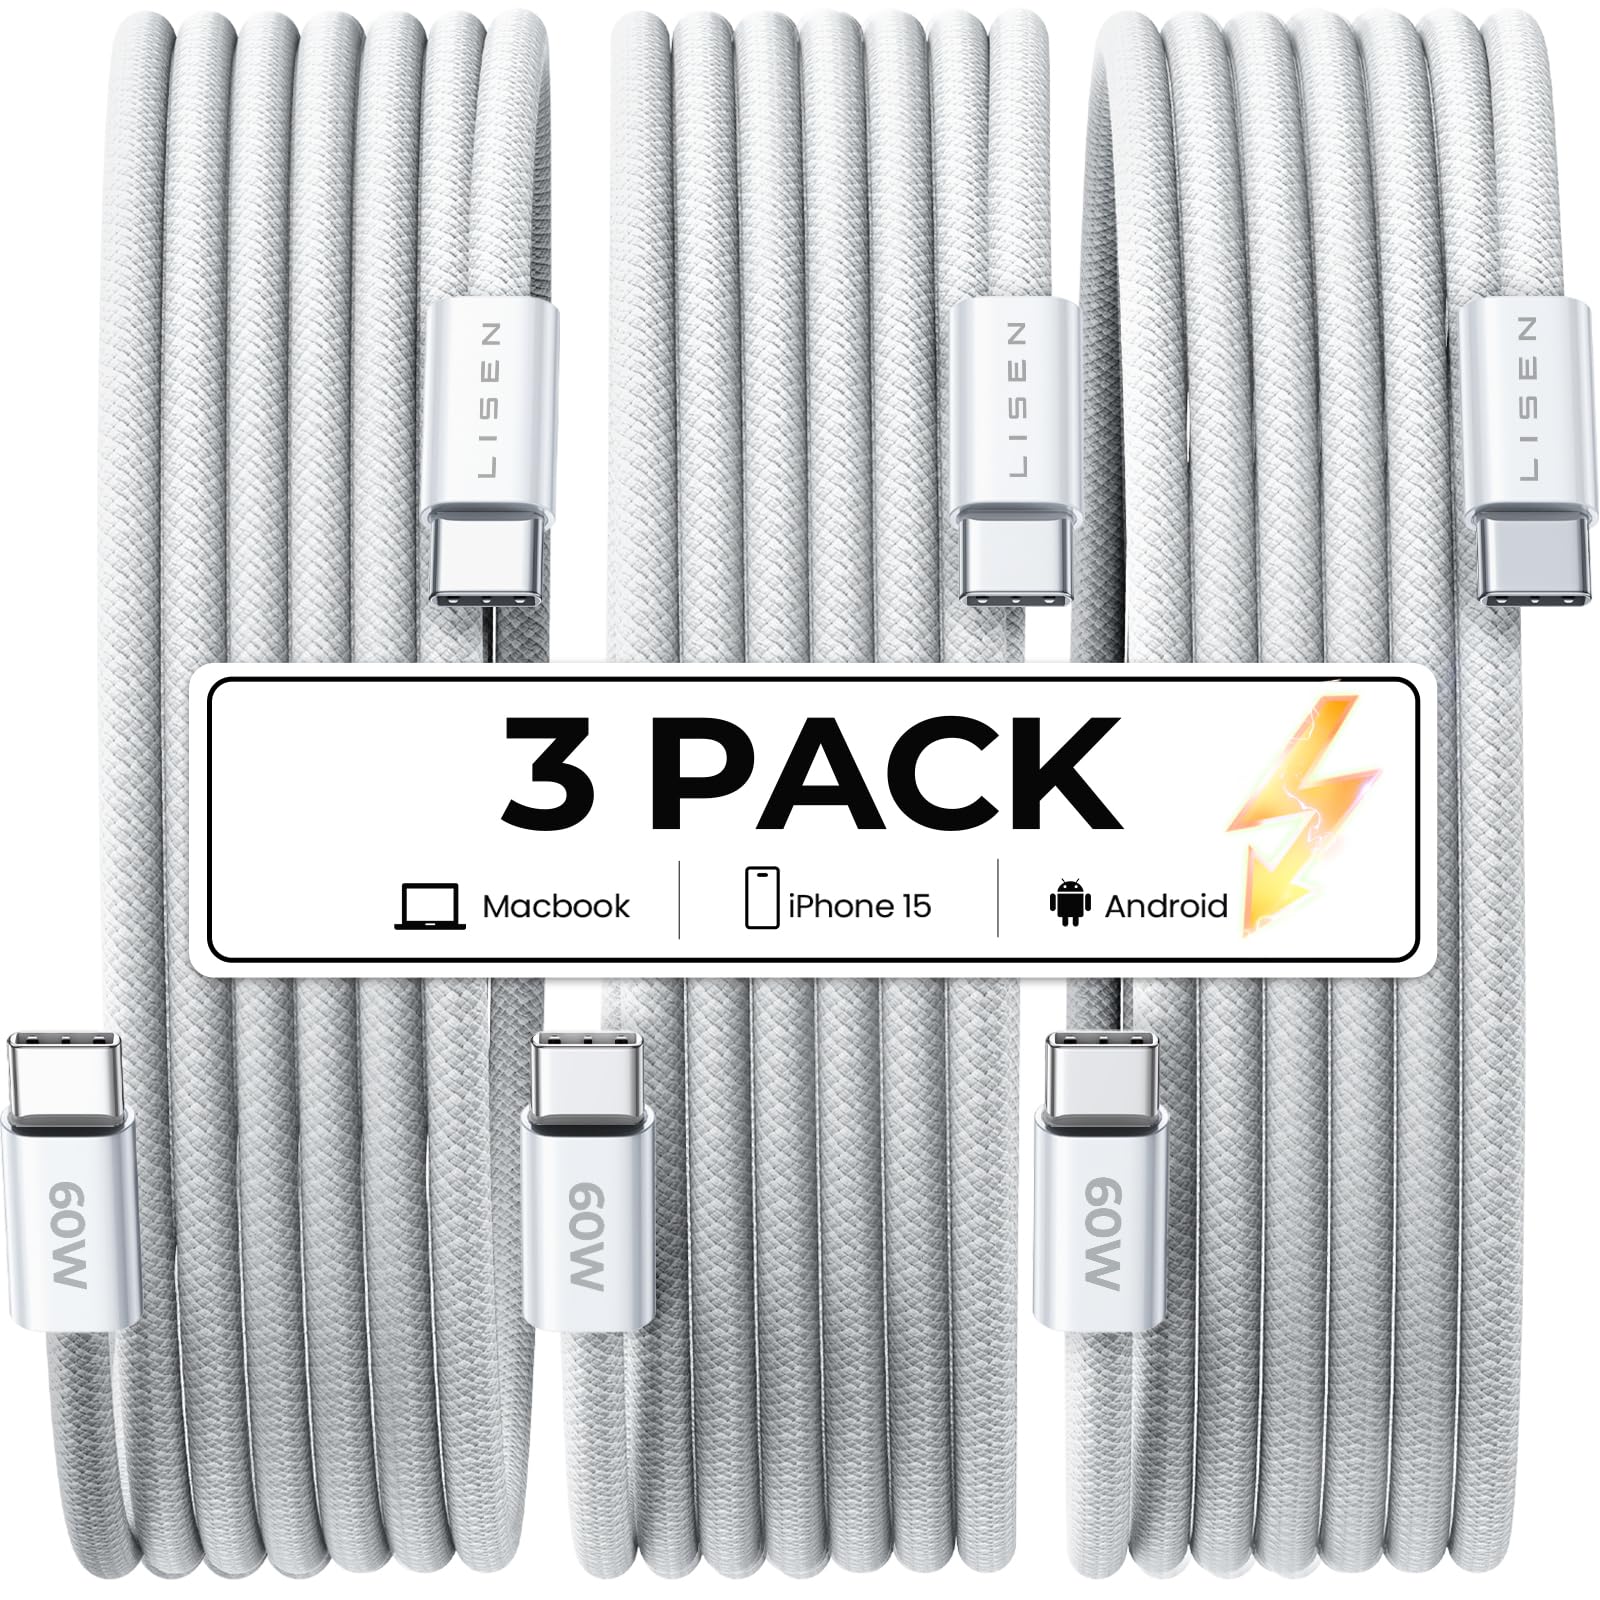 3-Pack LISEN 6.6' 60W USB-C to USB-C Charger Cables $4.95 + Free Shipping w/ Prime or $35+